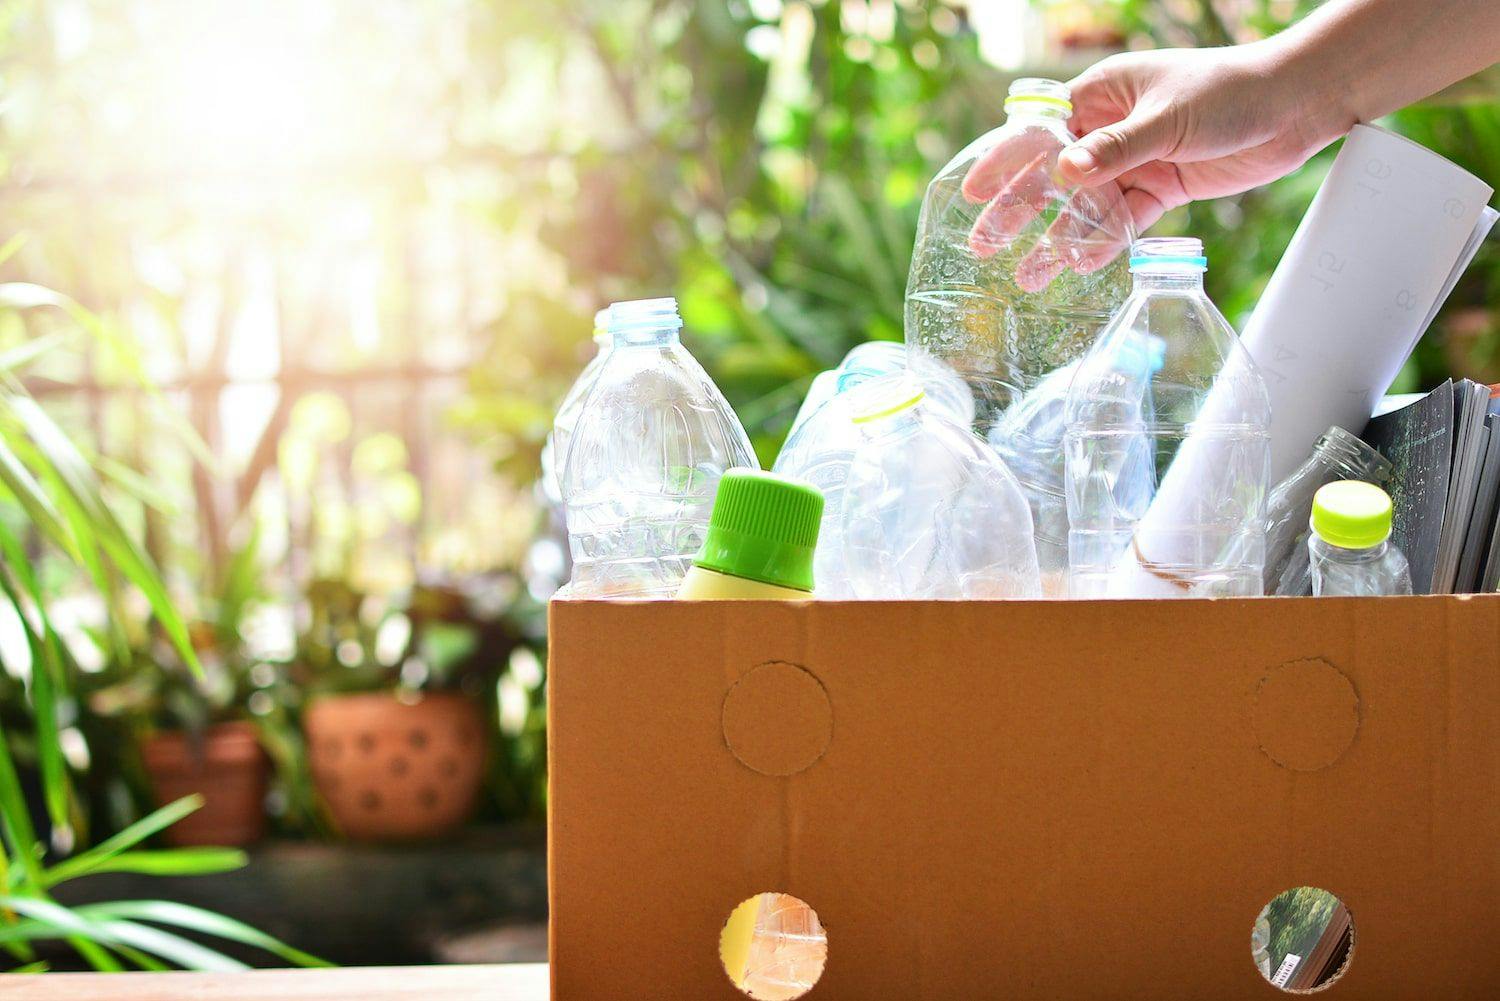 What can you do to reduce your household waste?